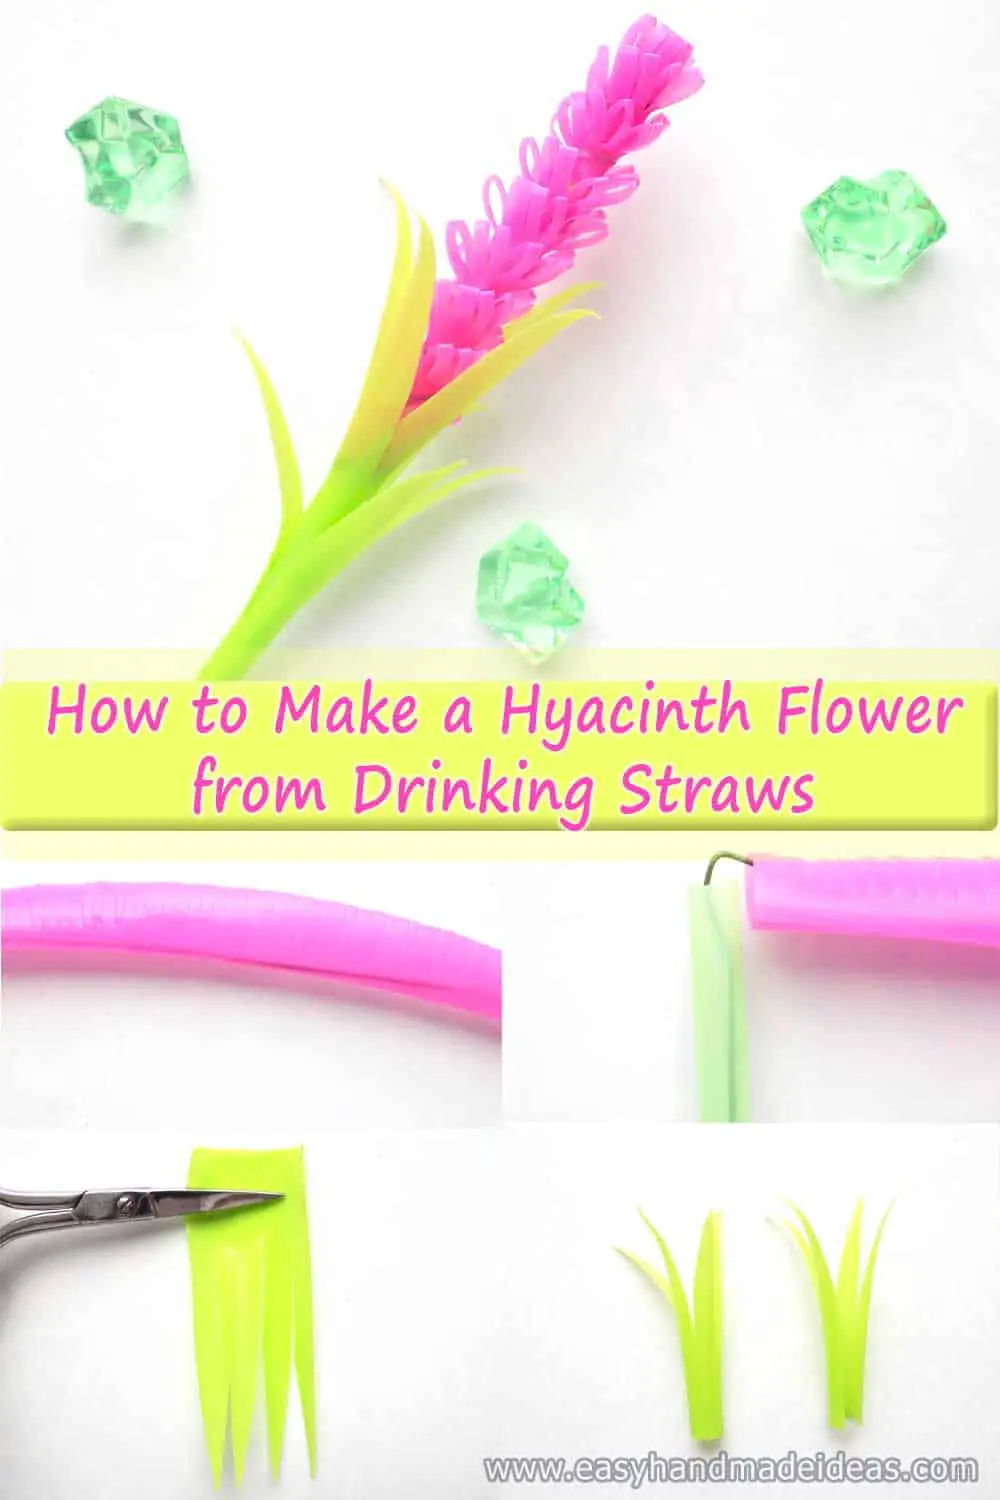 How to Make a Hyacinth Flower from Drinking Straws